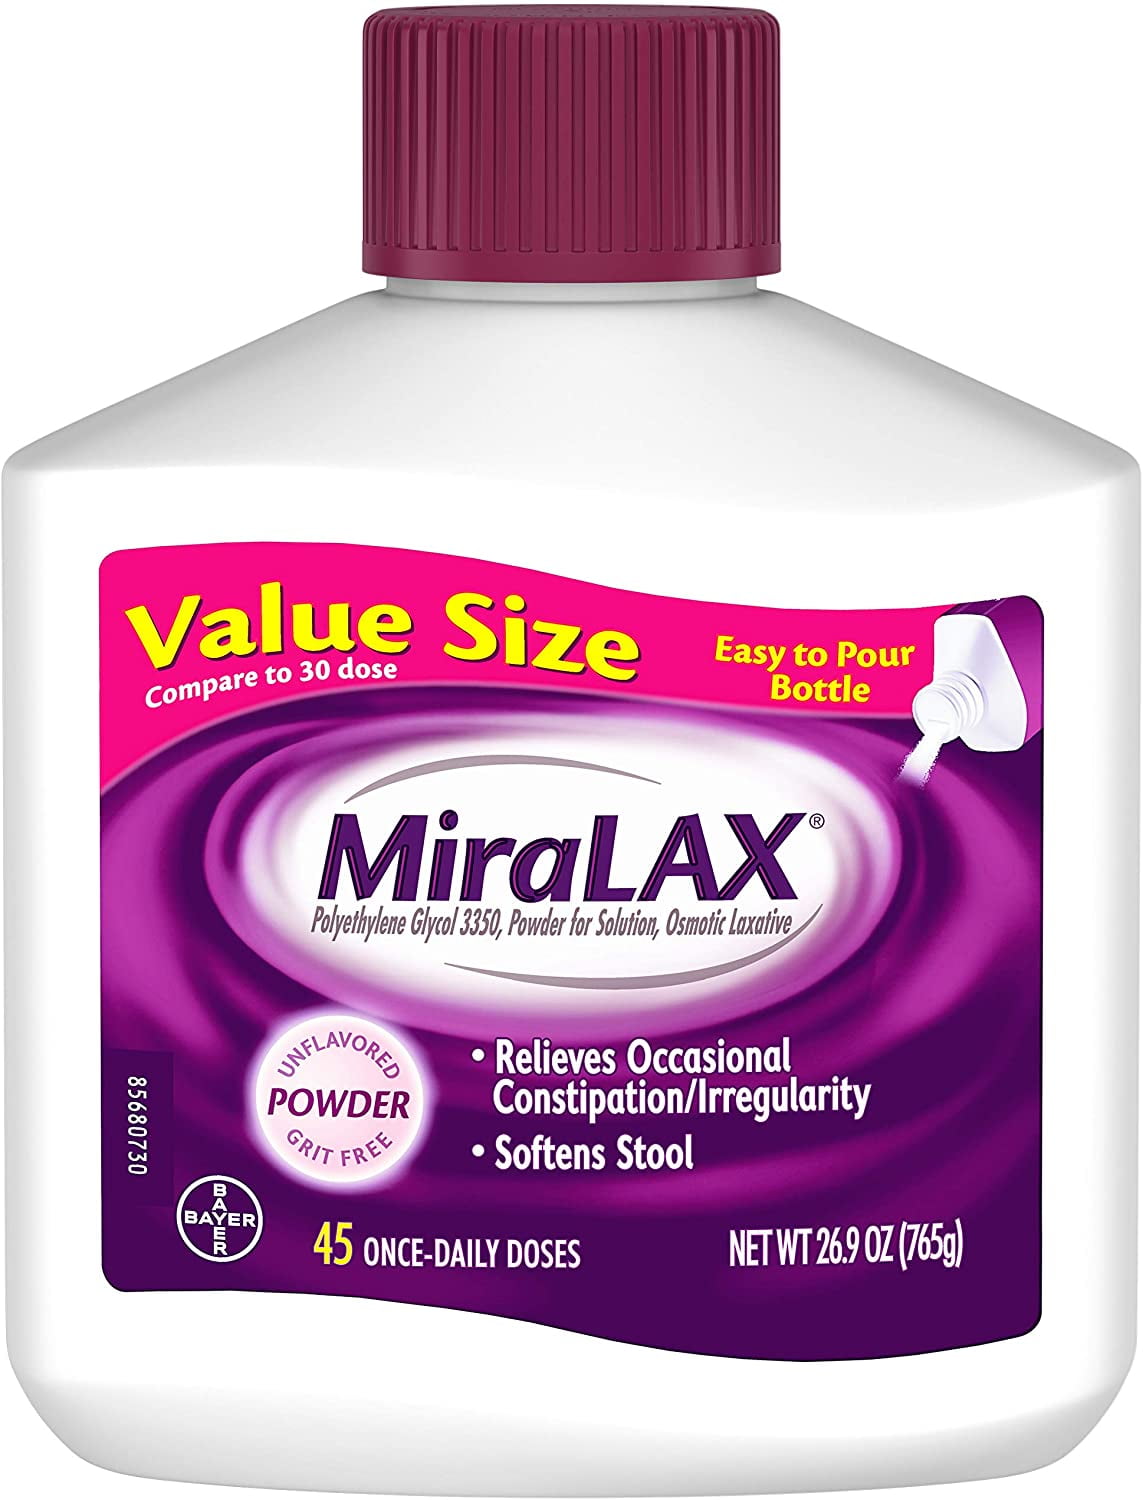 miralax-laxative-powder-for-gentle-constipation-relief-1-dr-recommended-brand-45-dose